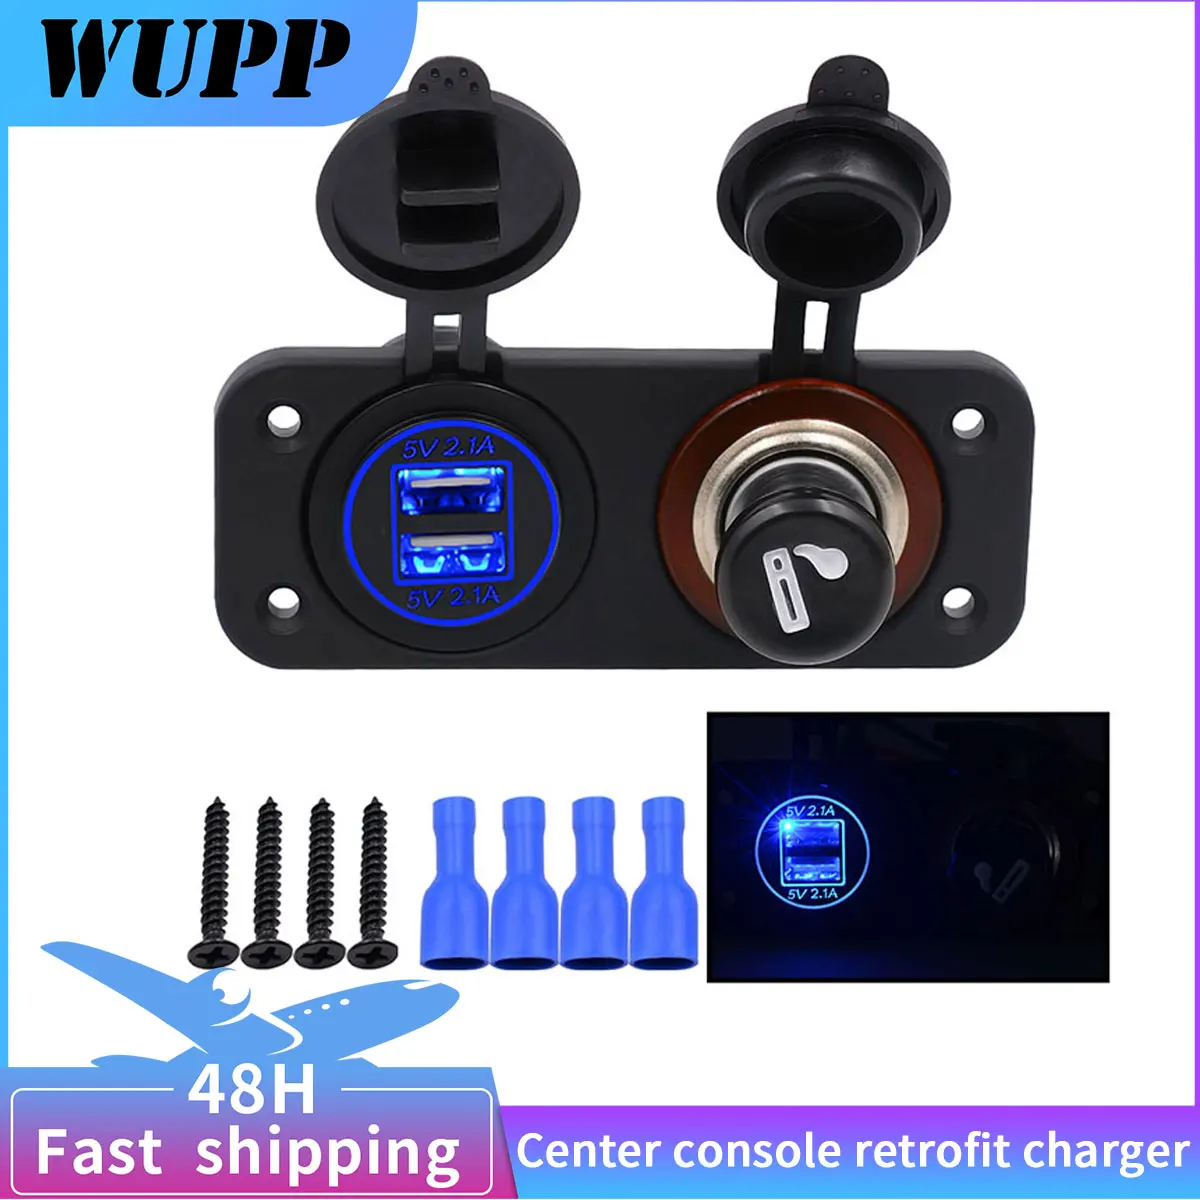 

WUPP DC 12/24V Cigarette Lighter With Switches Dual 4.2A USB Charging for Car Boat Truck Caravans Vehicles With Cigarette Butts